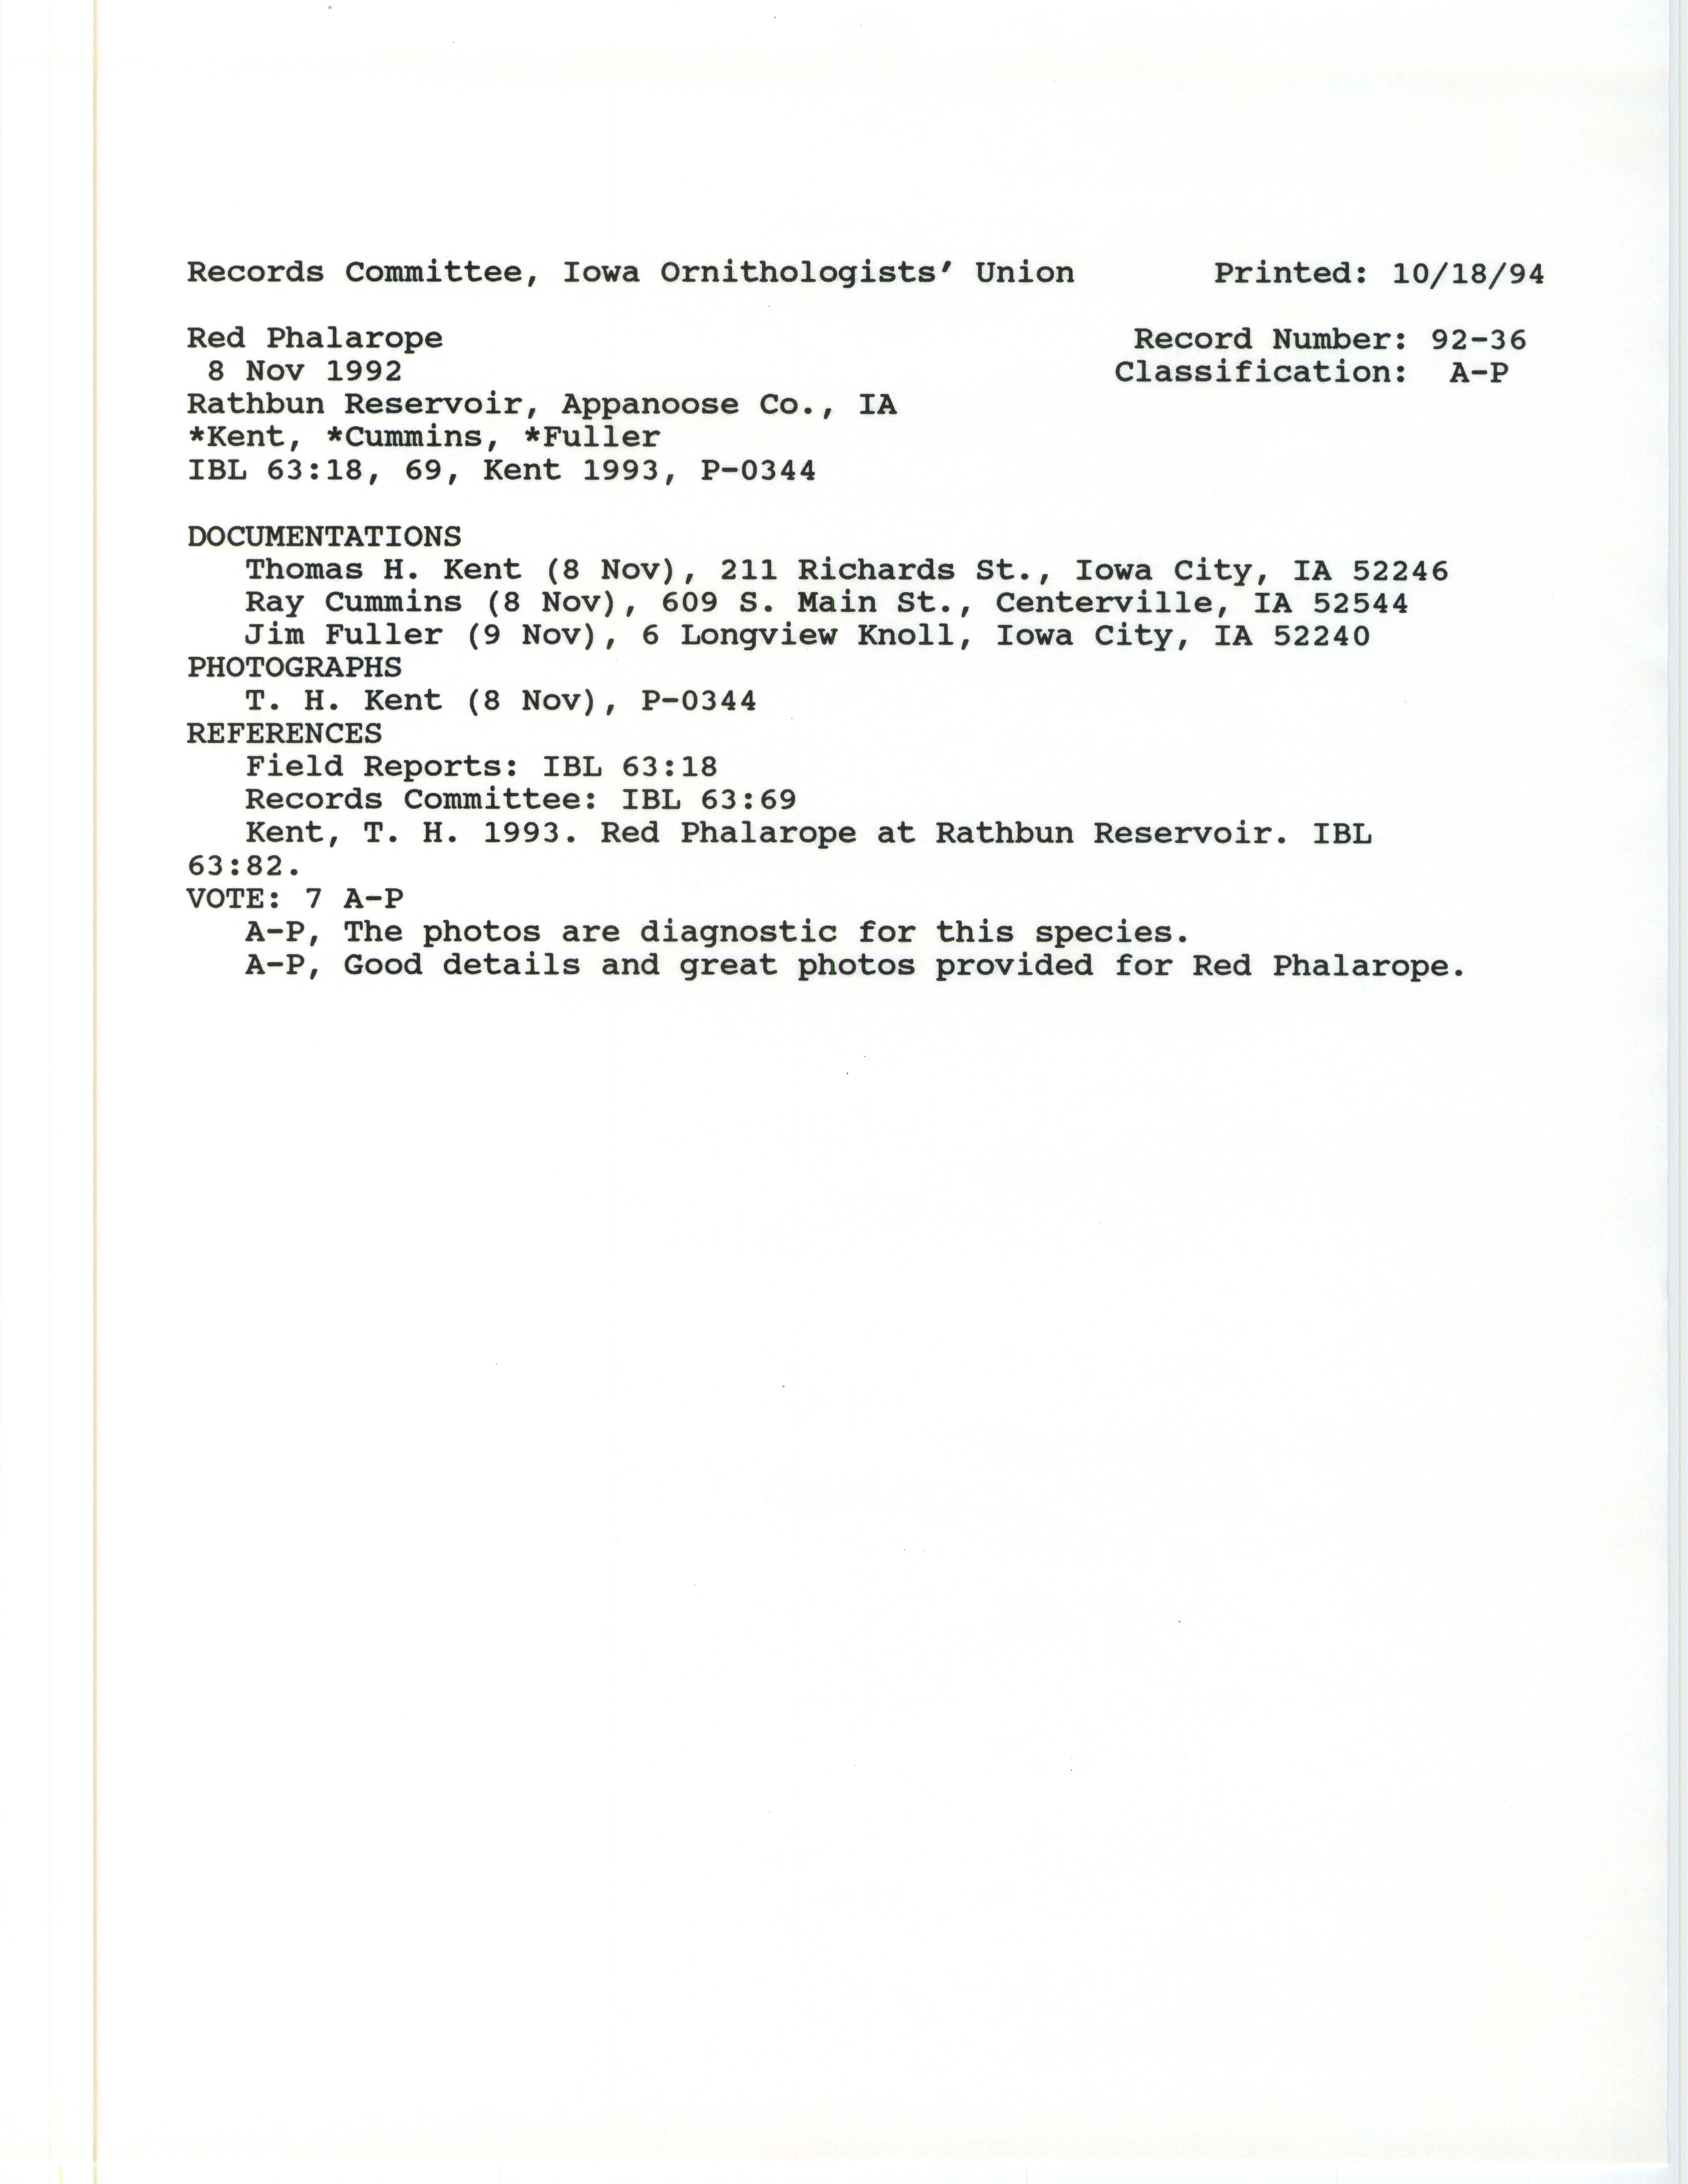 Records Committee review for rare bird sighting of Red Phalarope at Rathbun Reservoir, 1992